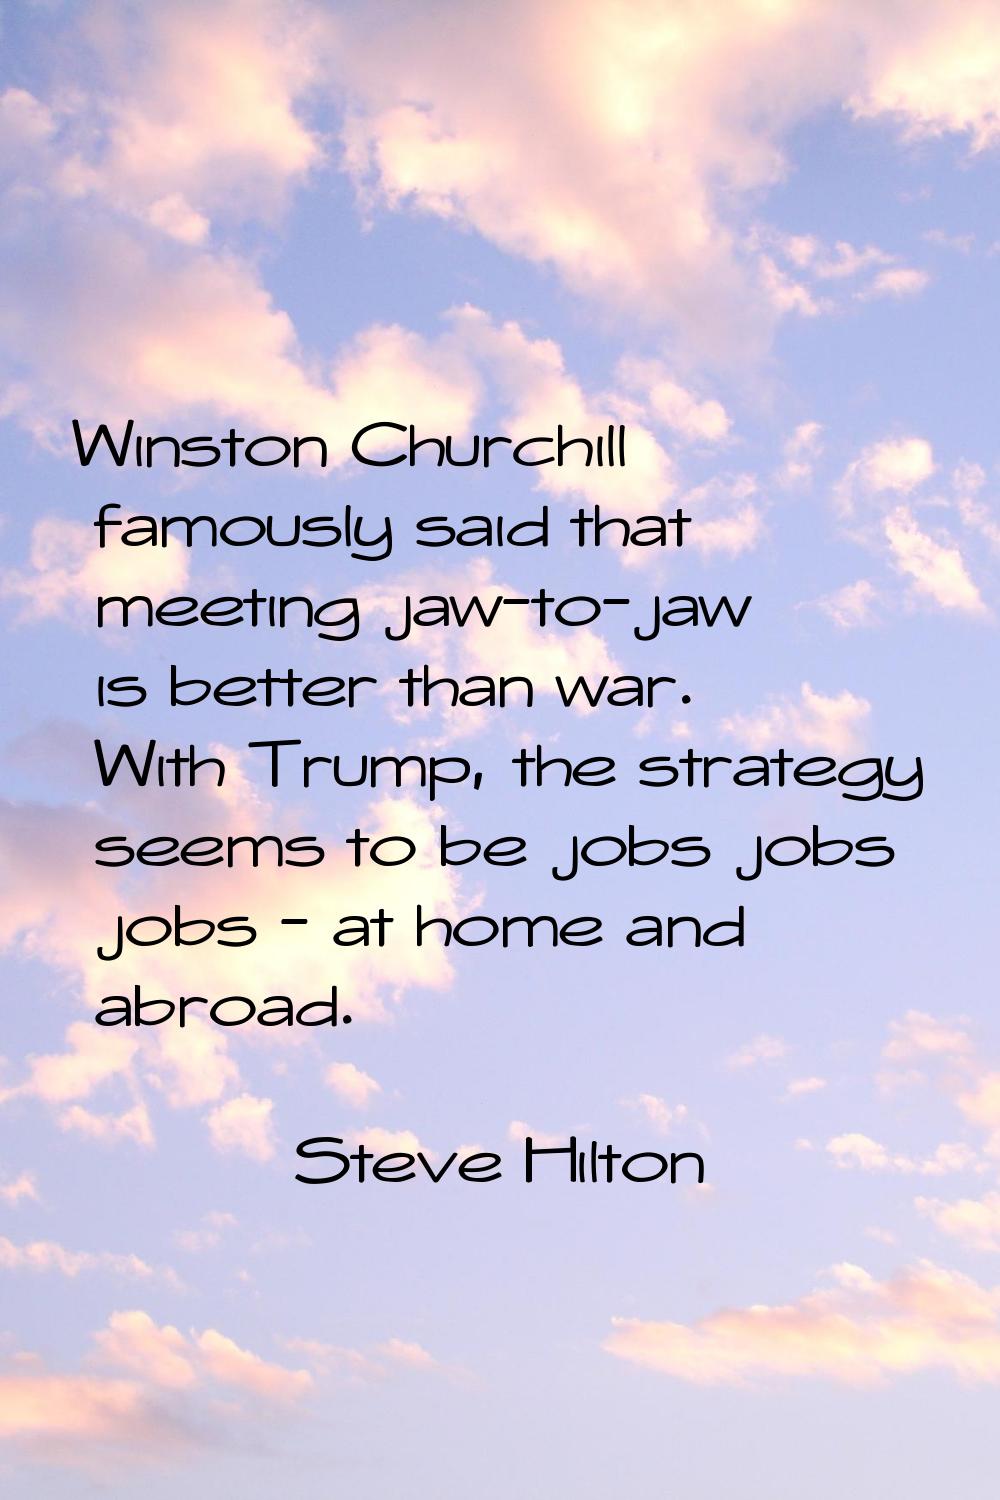 Winston Churchill famously said that meeting jaw-to-jaw is better than war. With Trump, the strateg